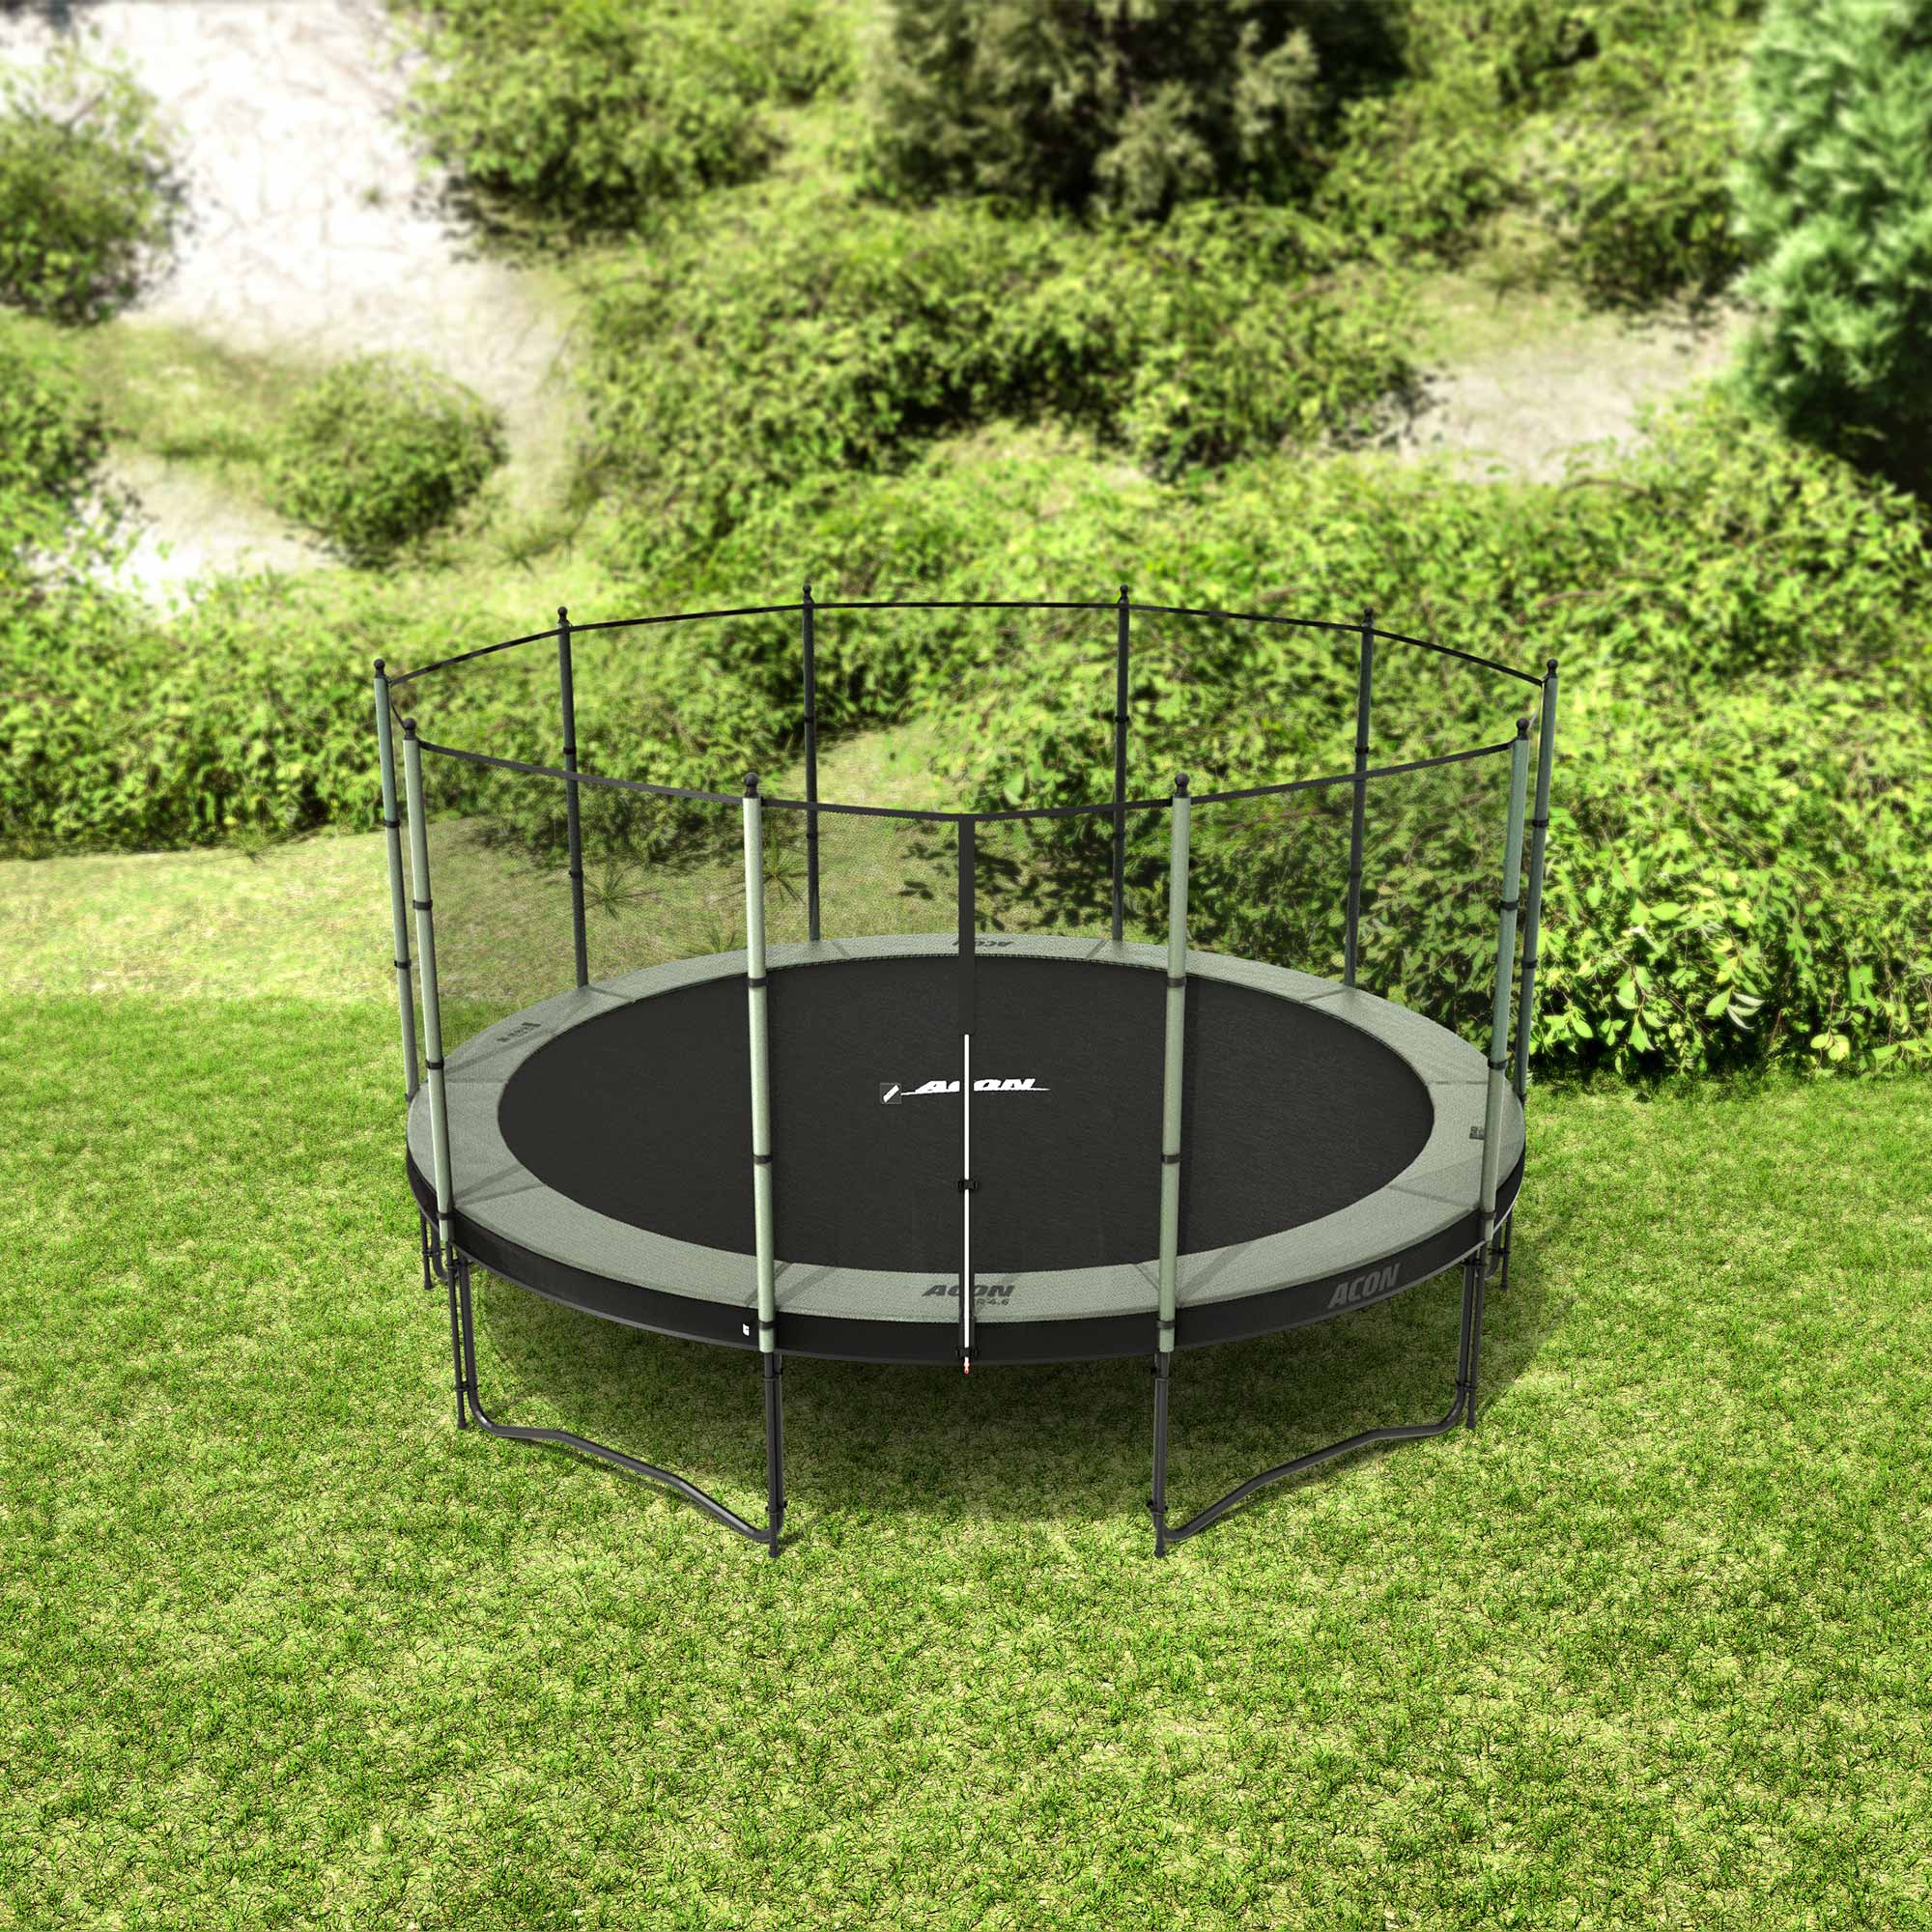 ACON Air 4,6m Trampoline with Standard Enclosure in the backyard.